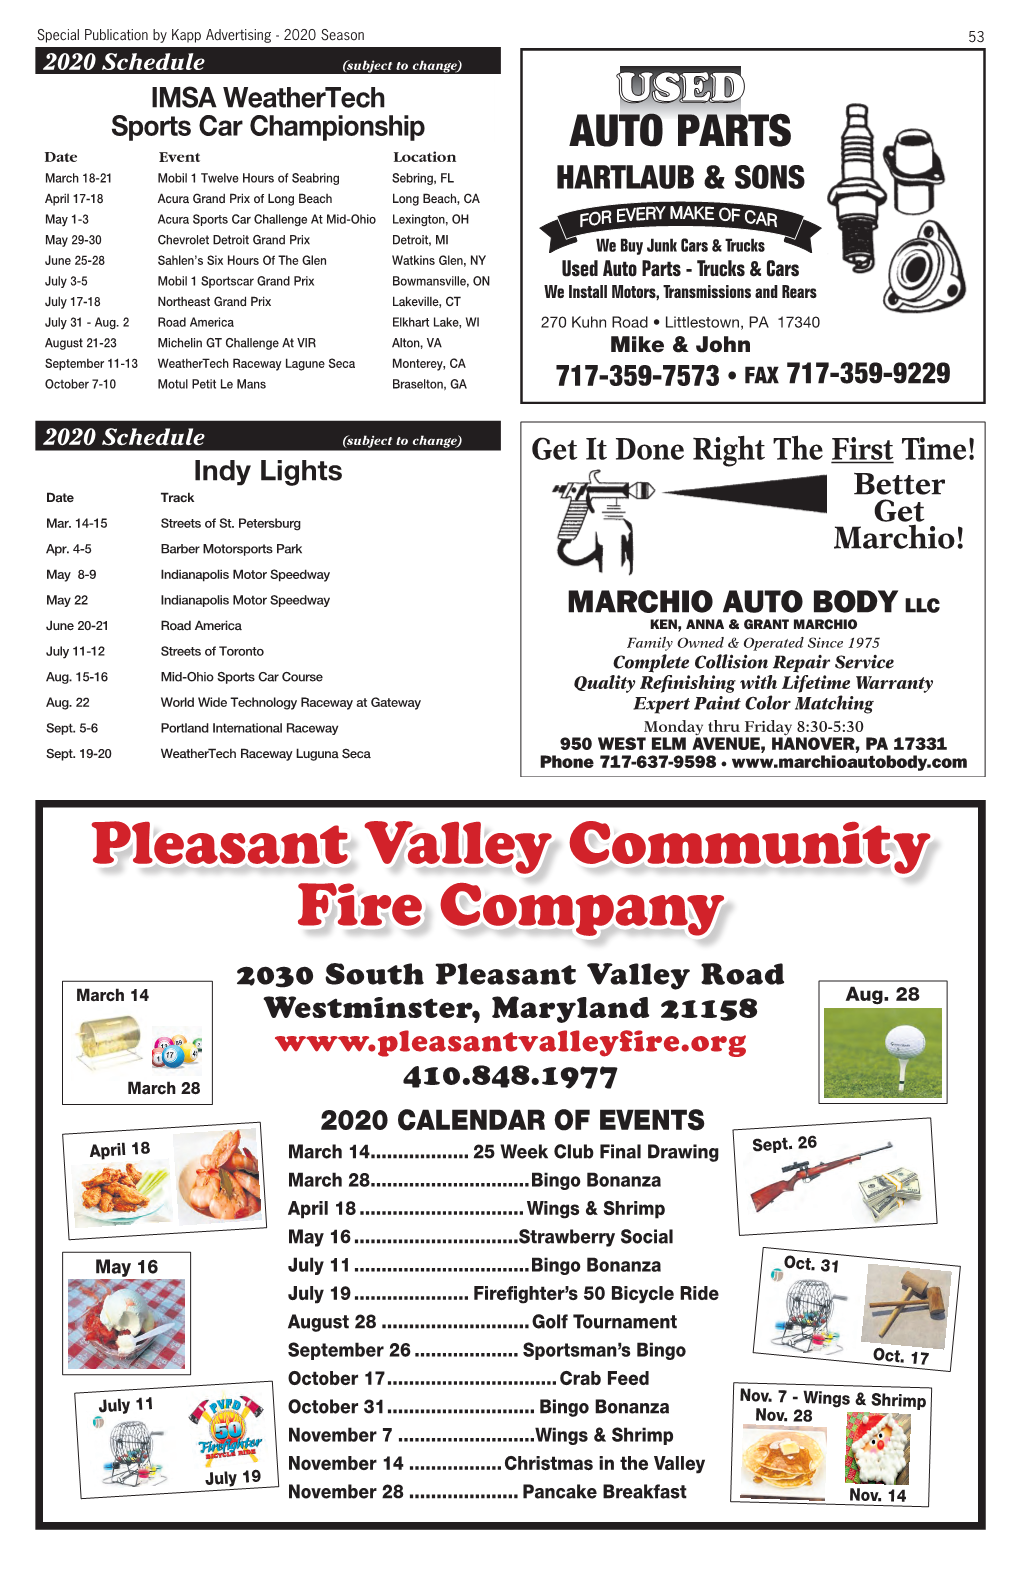 Pleasant Valley Community Fire Company 2030 South Pleasant Valley Road March 14 Westminster, Maryland 21158 Aug